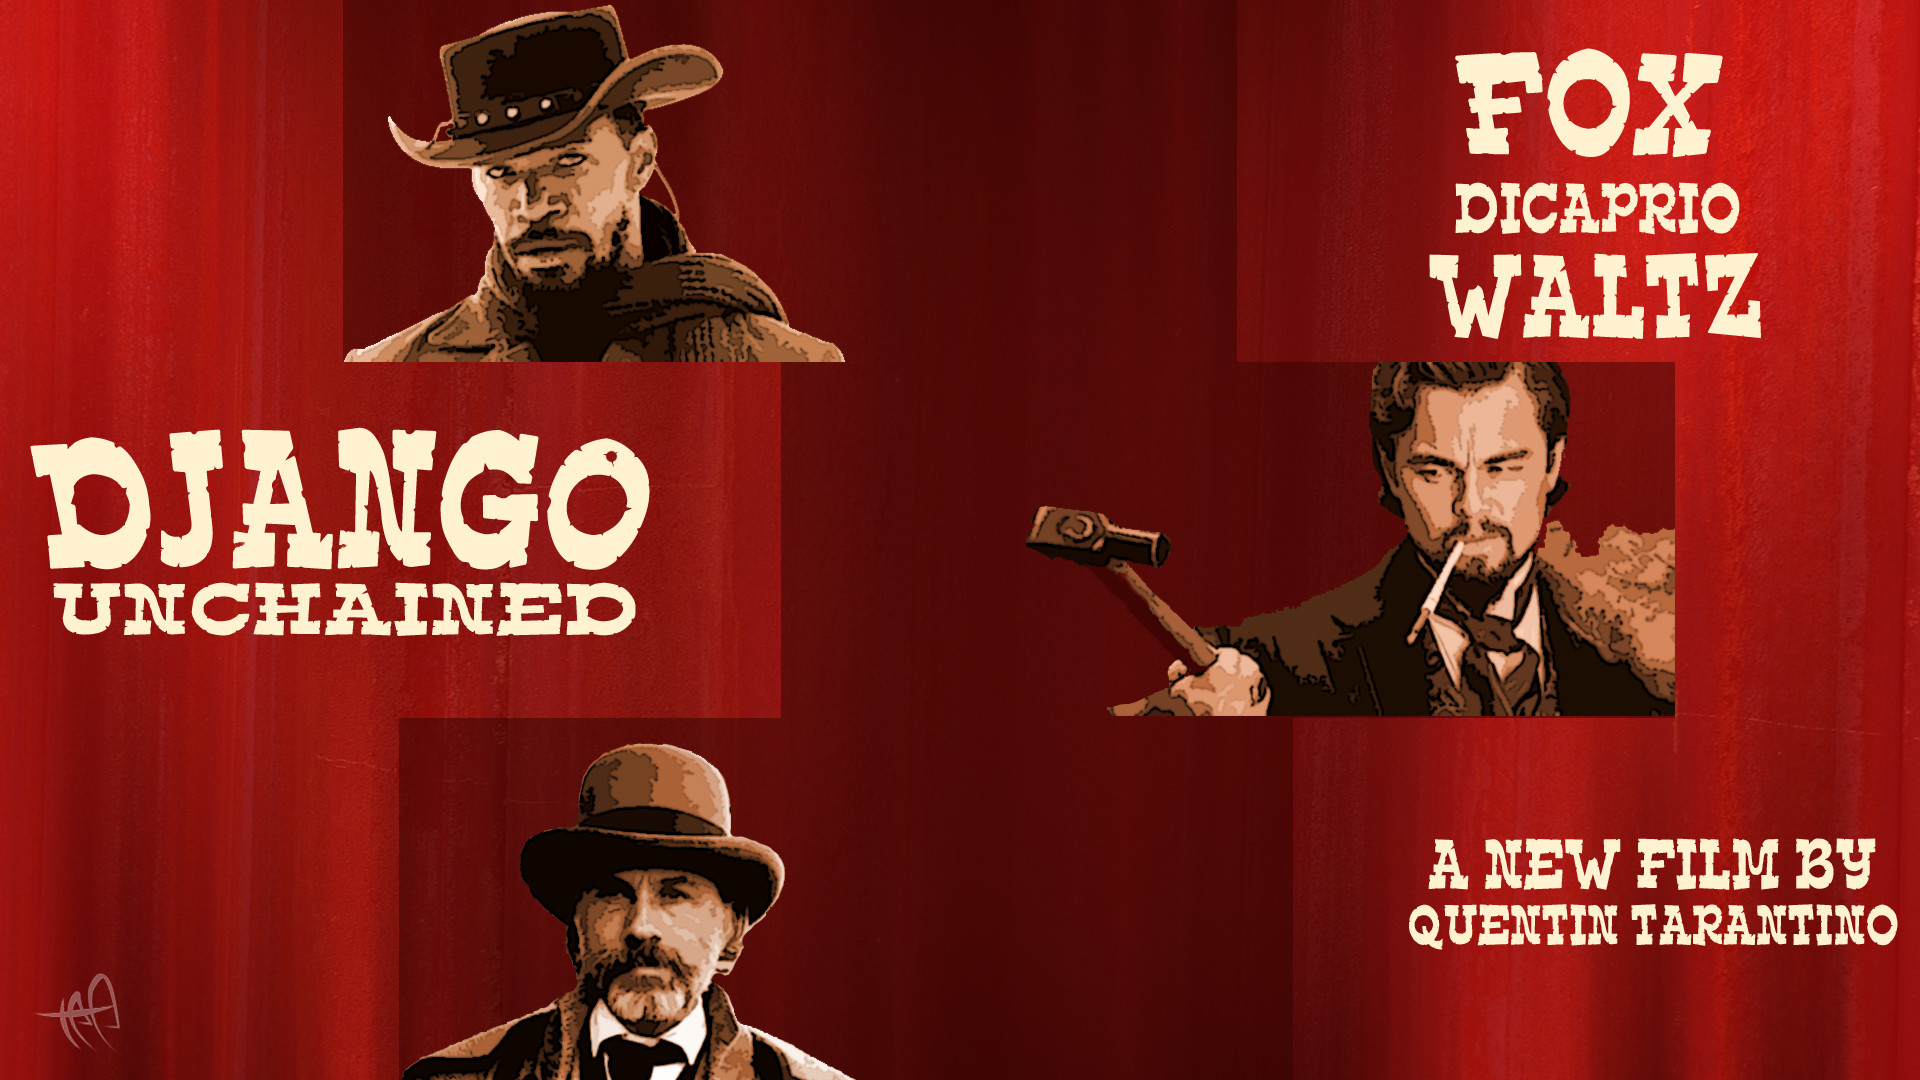 1920x1080 Django Unchained Wallpaper by private-tee on DeviantArt